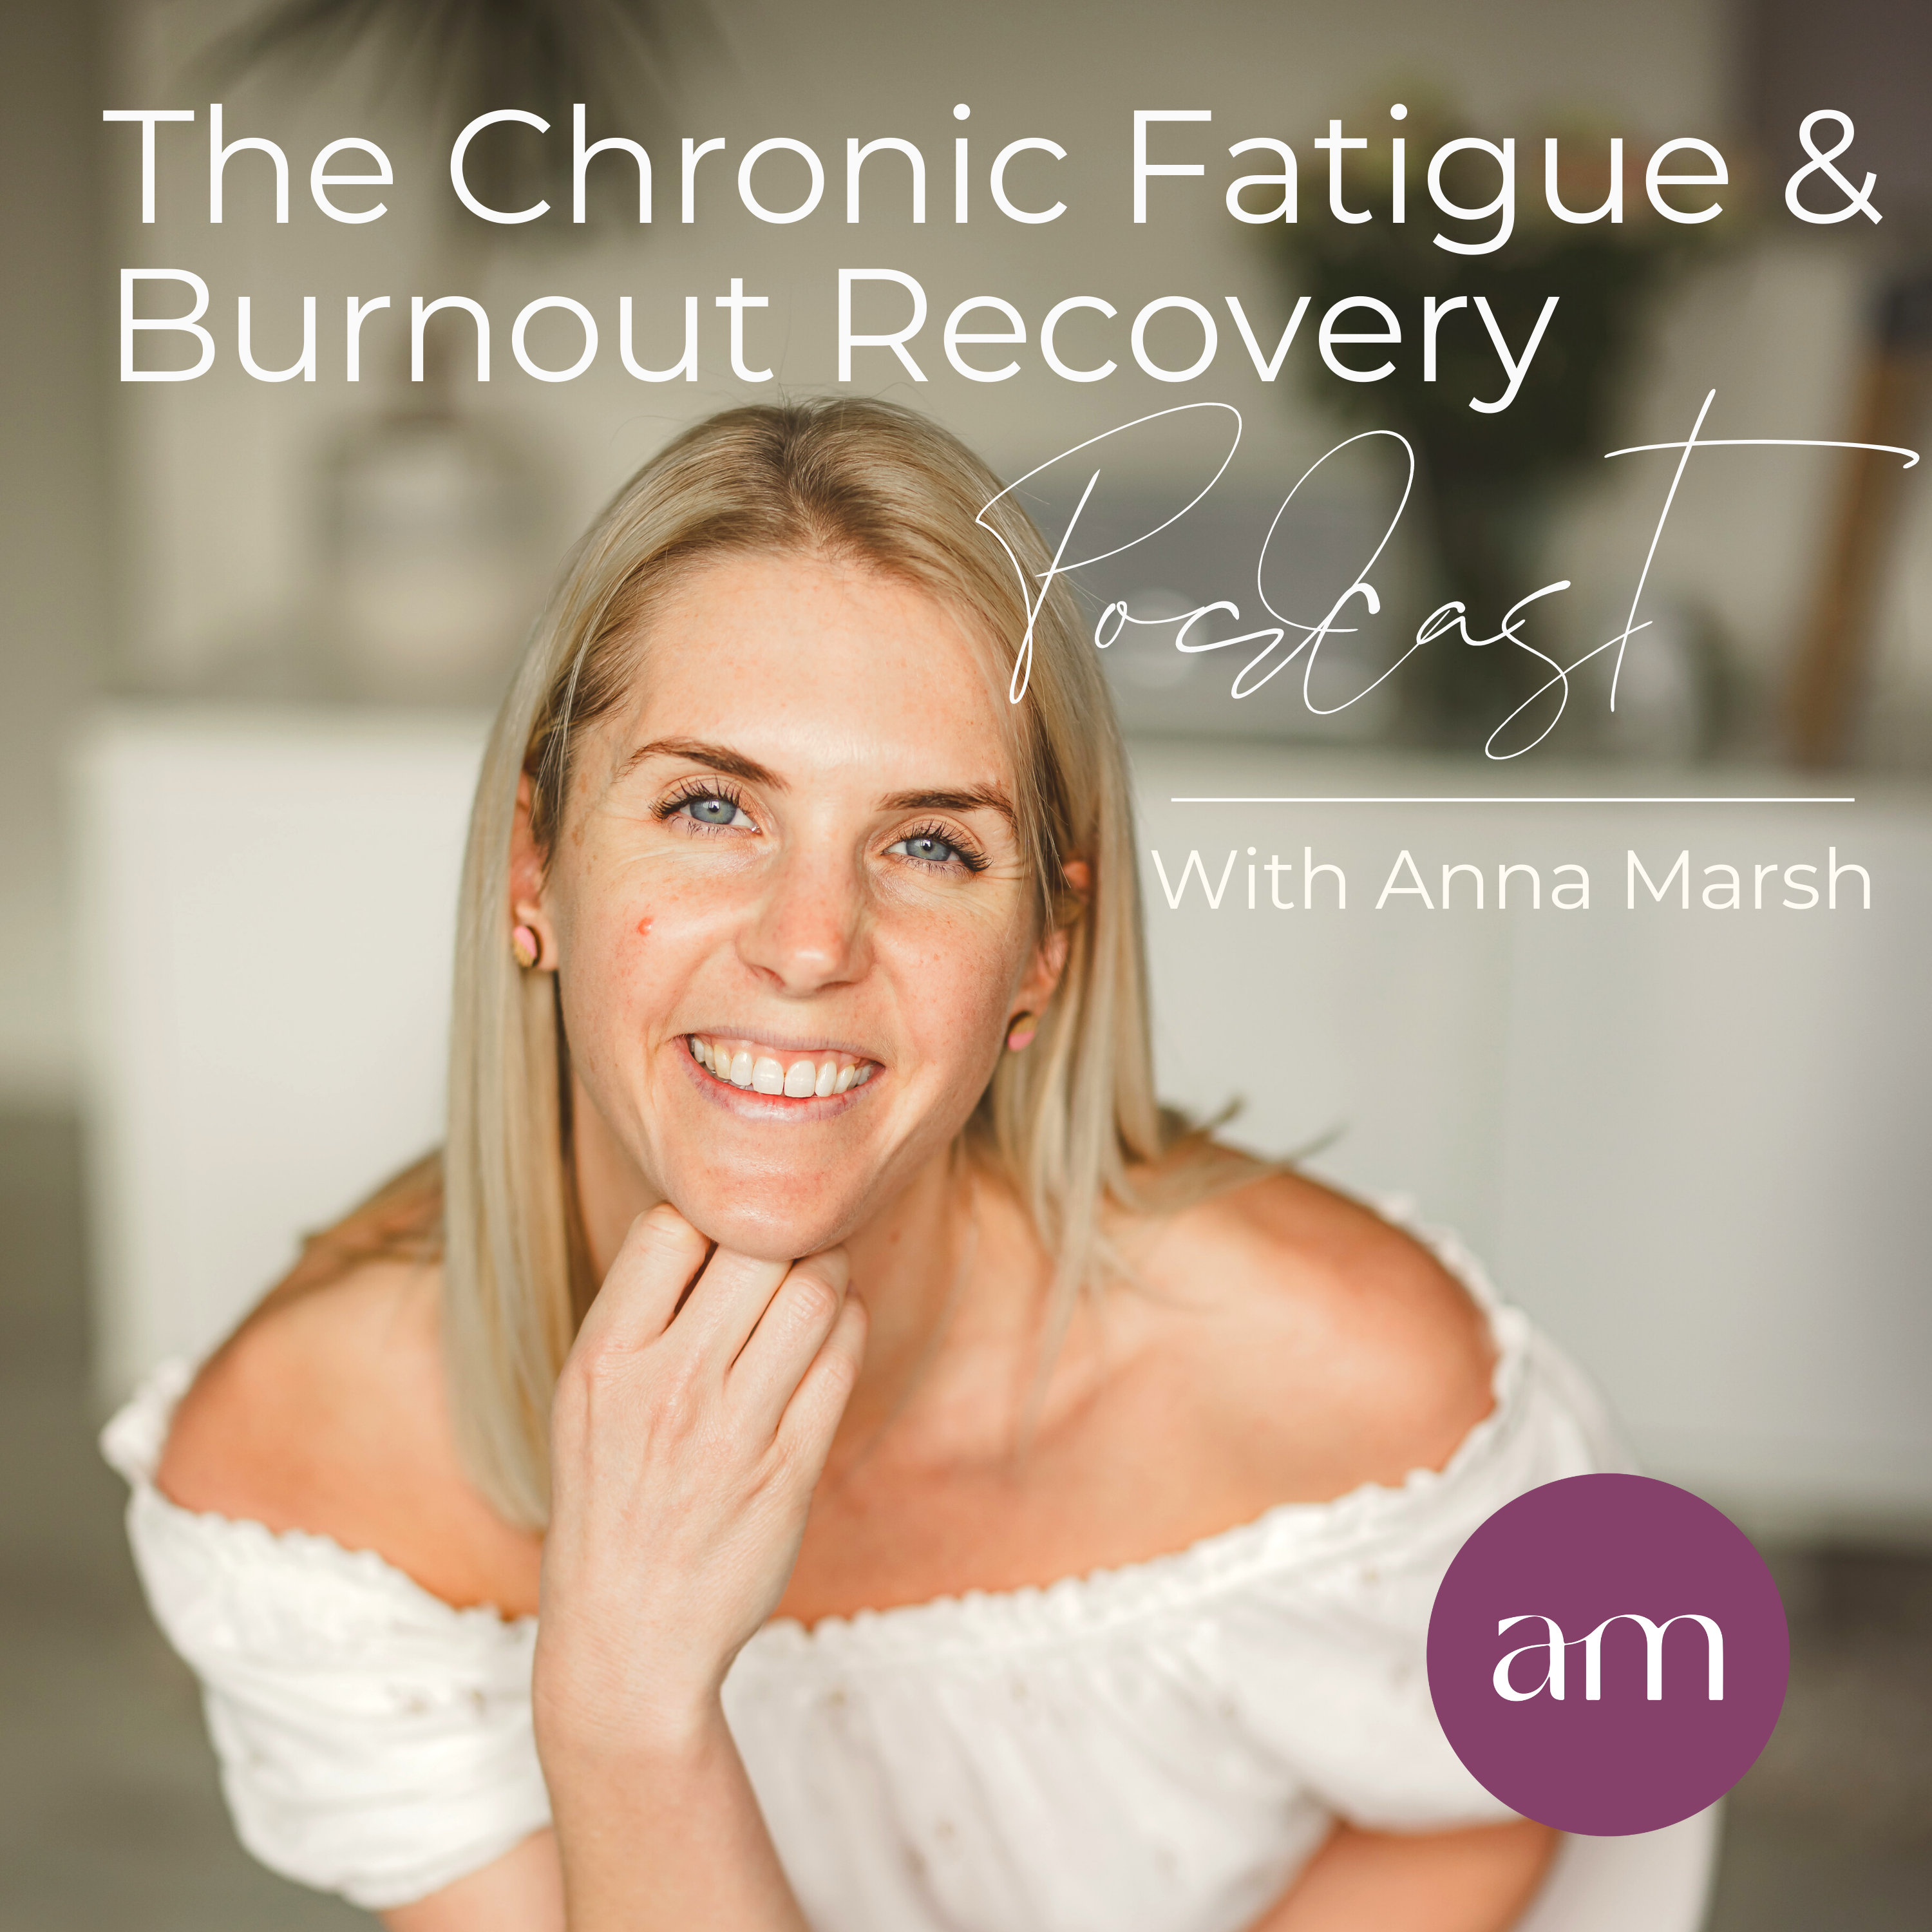 Episode 48 – The Triad of Fatigue, Low Mood and Chronic Pain